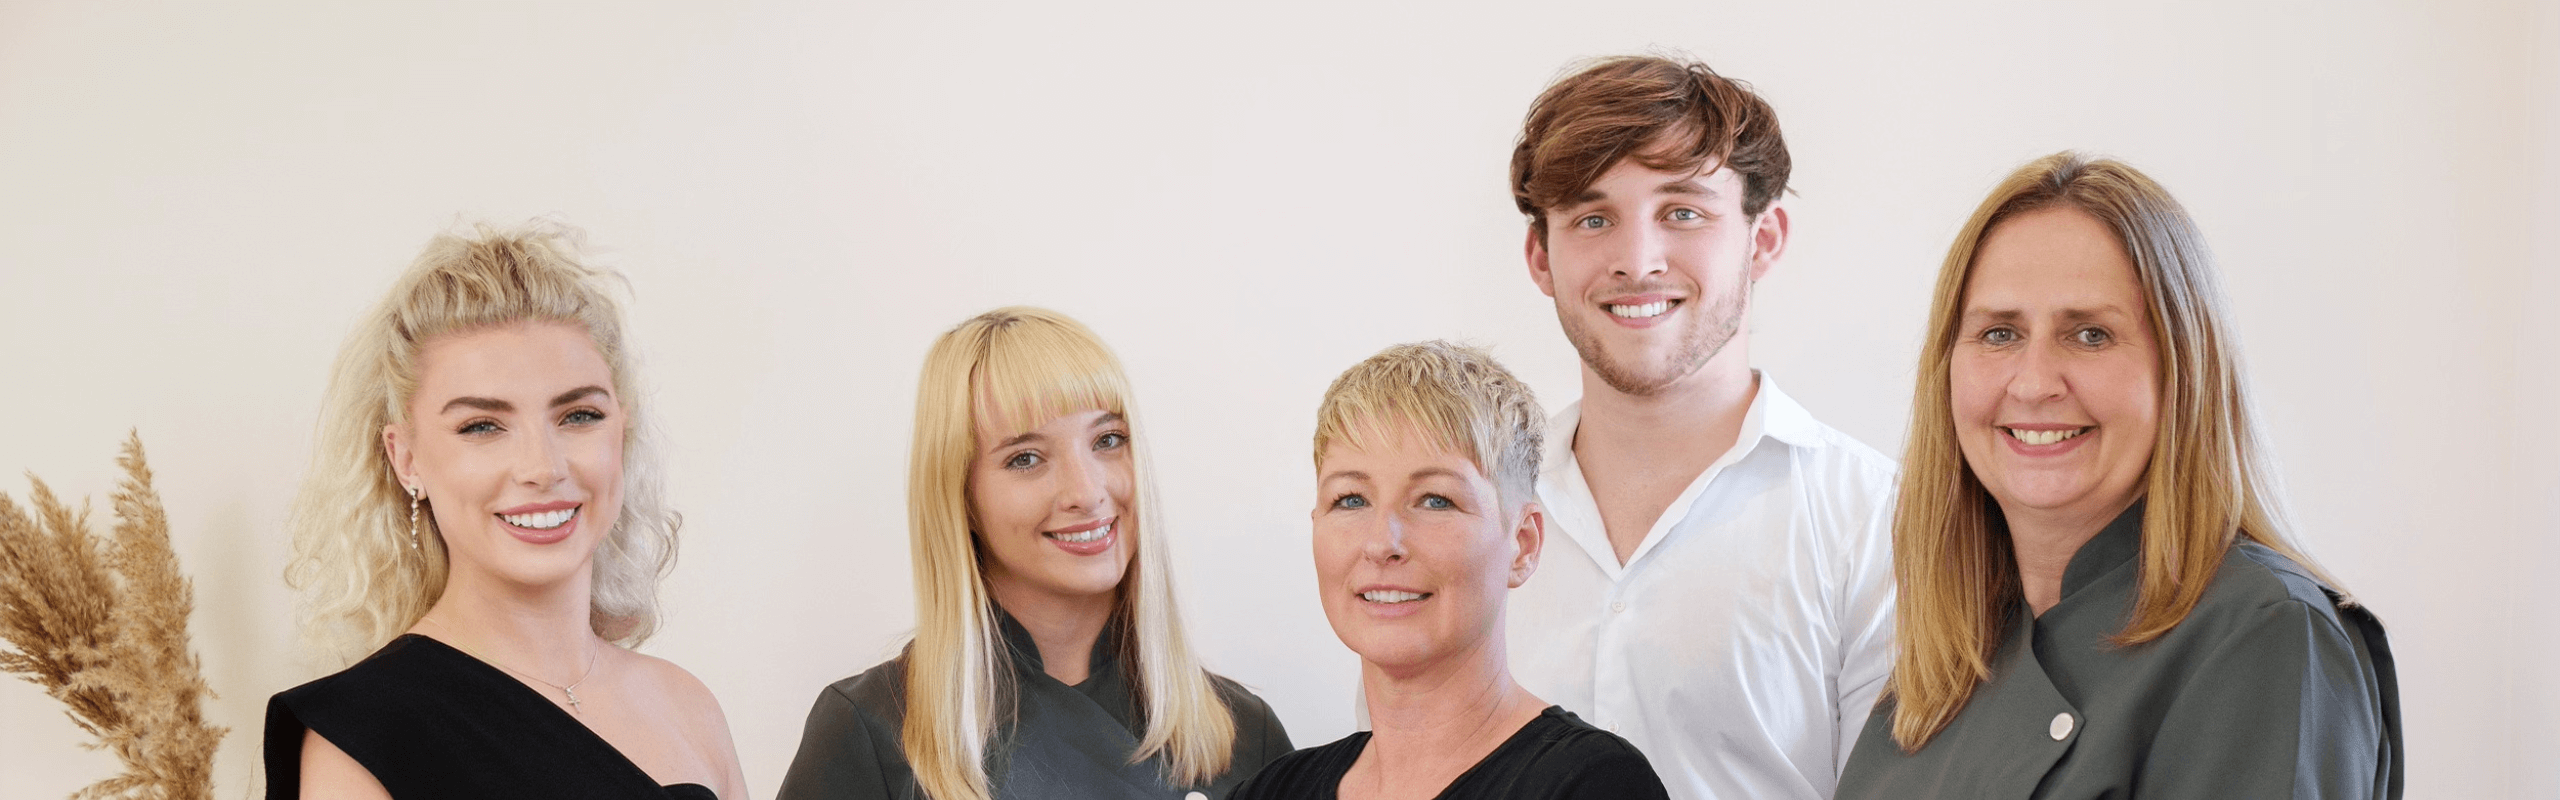 our team at stella dental in Stafford. New website